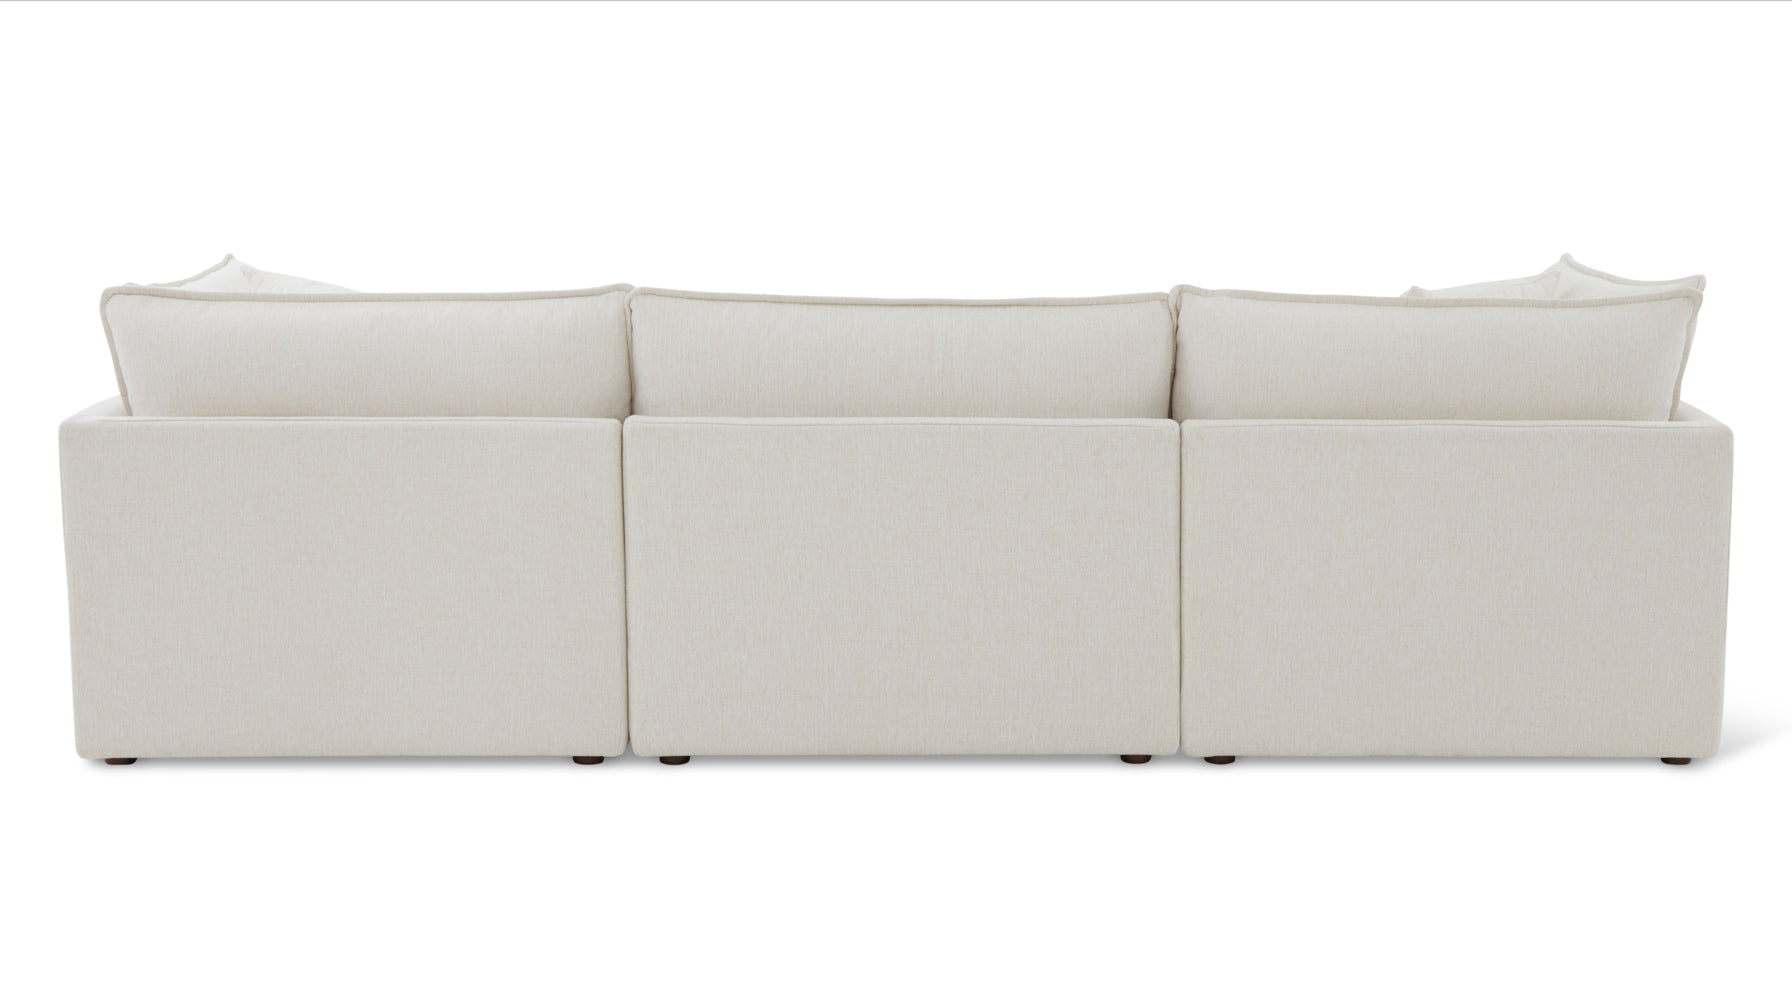 Chill Time 4-Piece Modular Sectional, Birch - Image 7